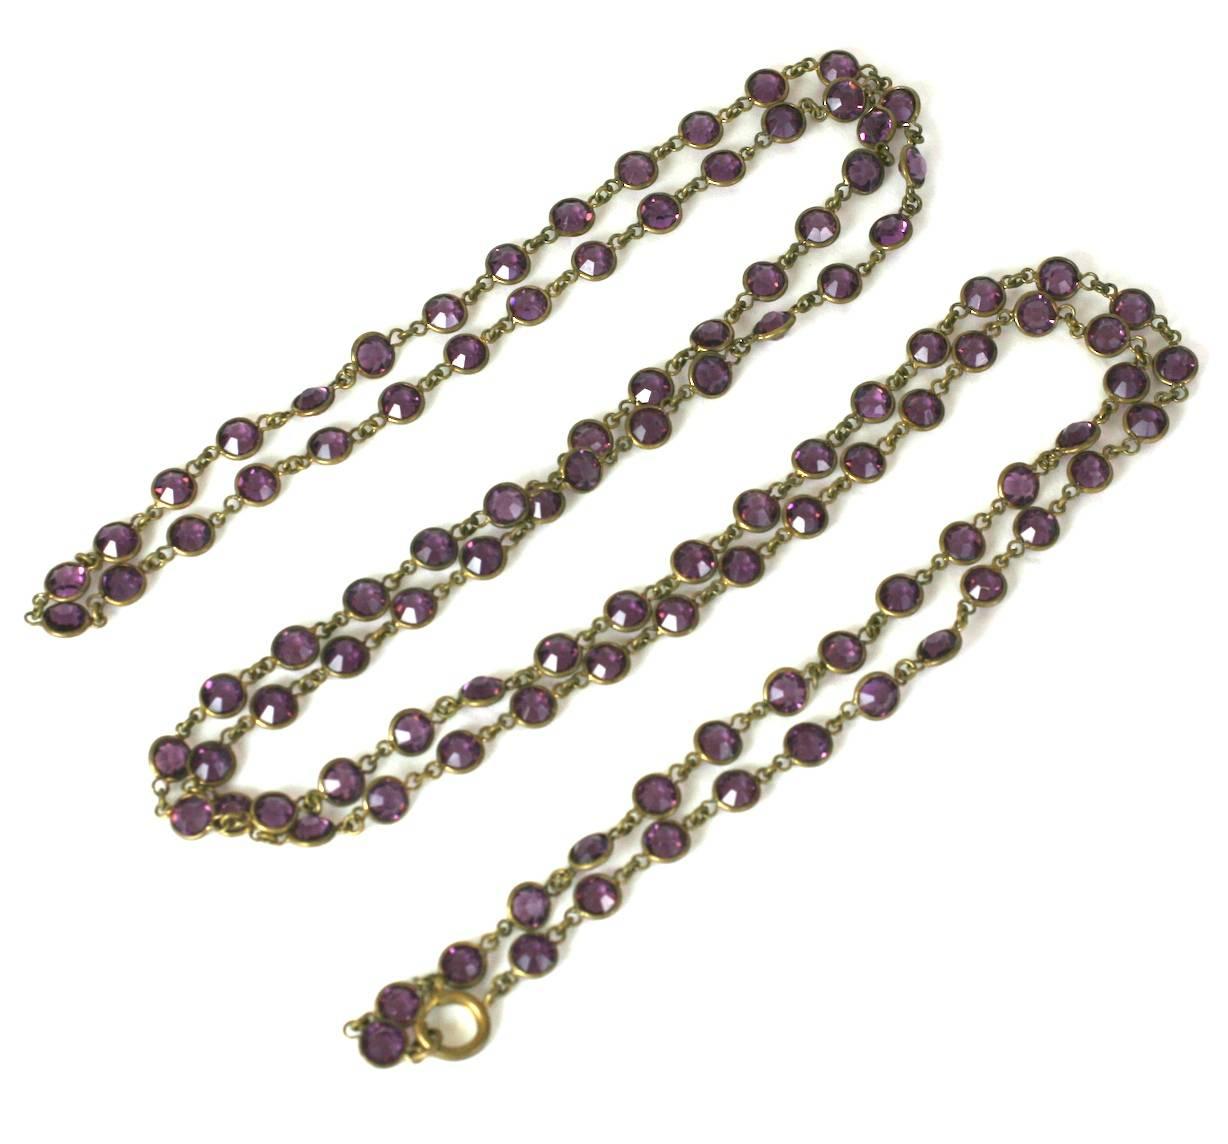 Art Deco Amythest Crystal Chain in super long length. Clasp allows chain to be wrapped multiple times or worn singley. Amythest glass crystals set in brass. 1920's USA. Excellent condition. 60